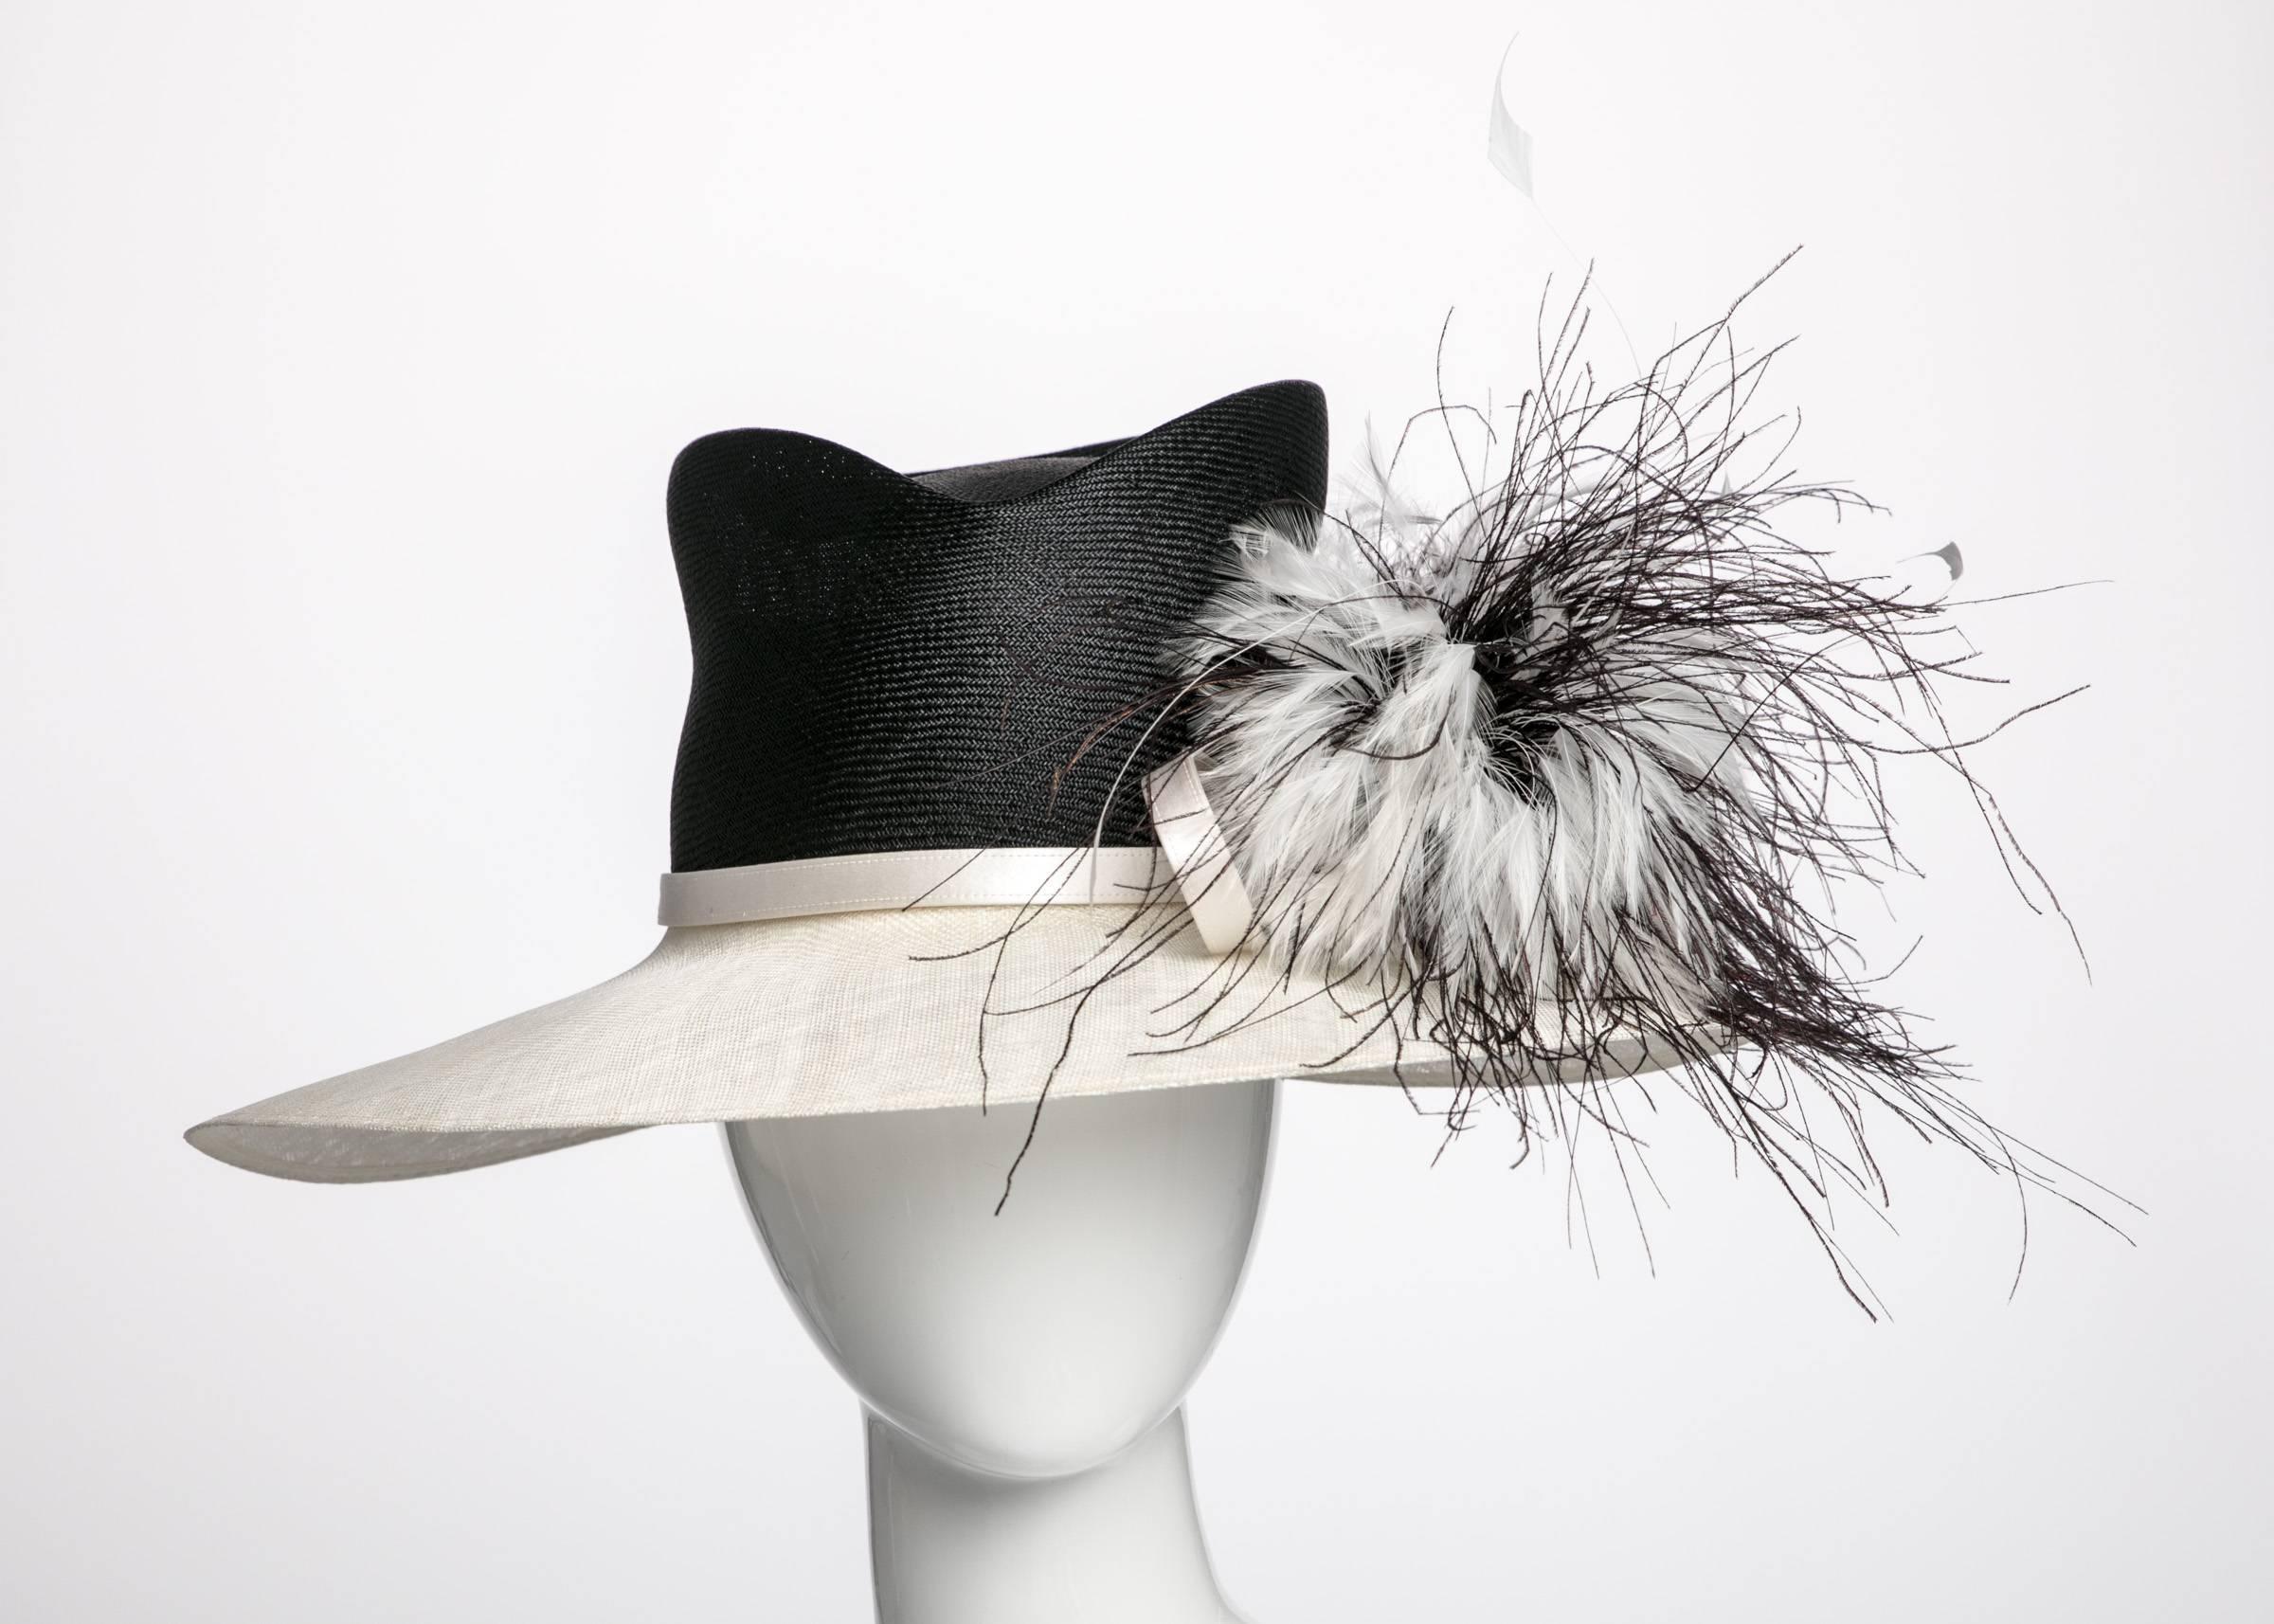 Irish born designer Philip Treacy gravitated towards millinery from an early age. During a July 6, 1990 interview for WWD, the 23 year old designer observed that “In some cases the clothes are actually the accessory to the hat.” This c2003 piece